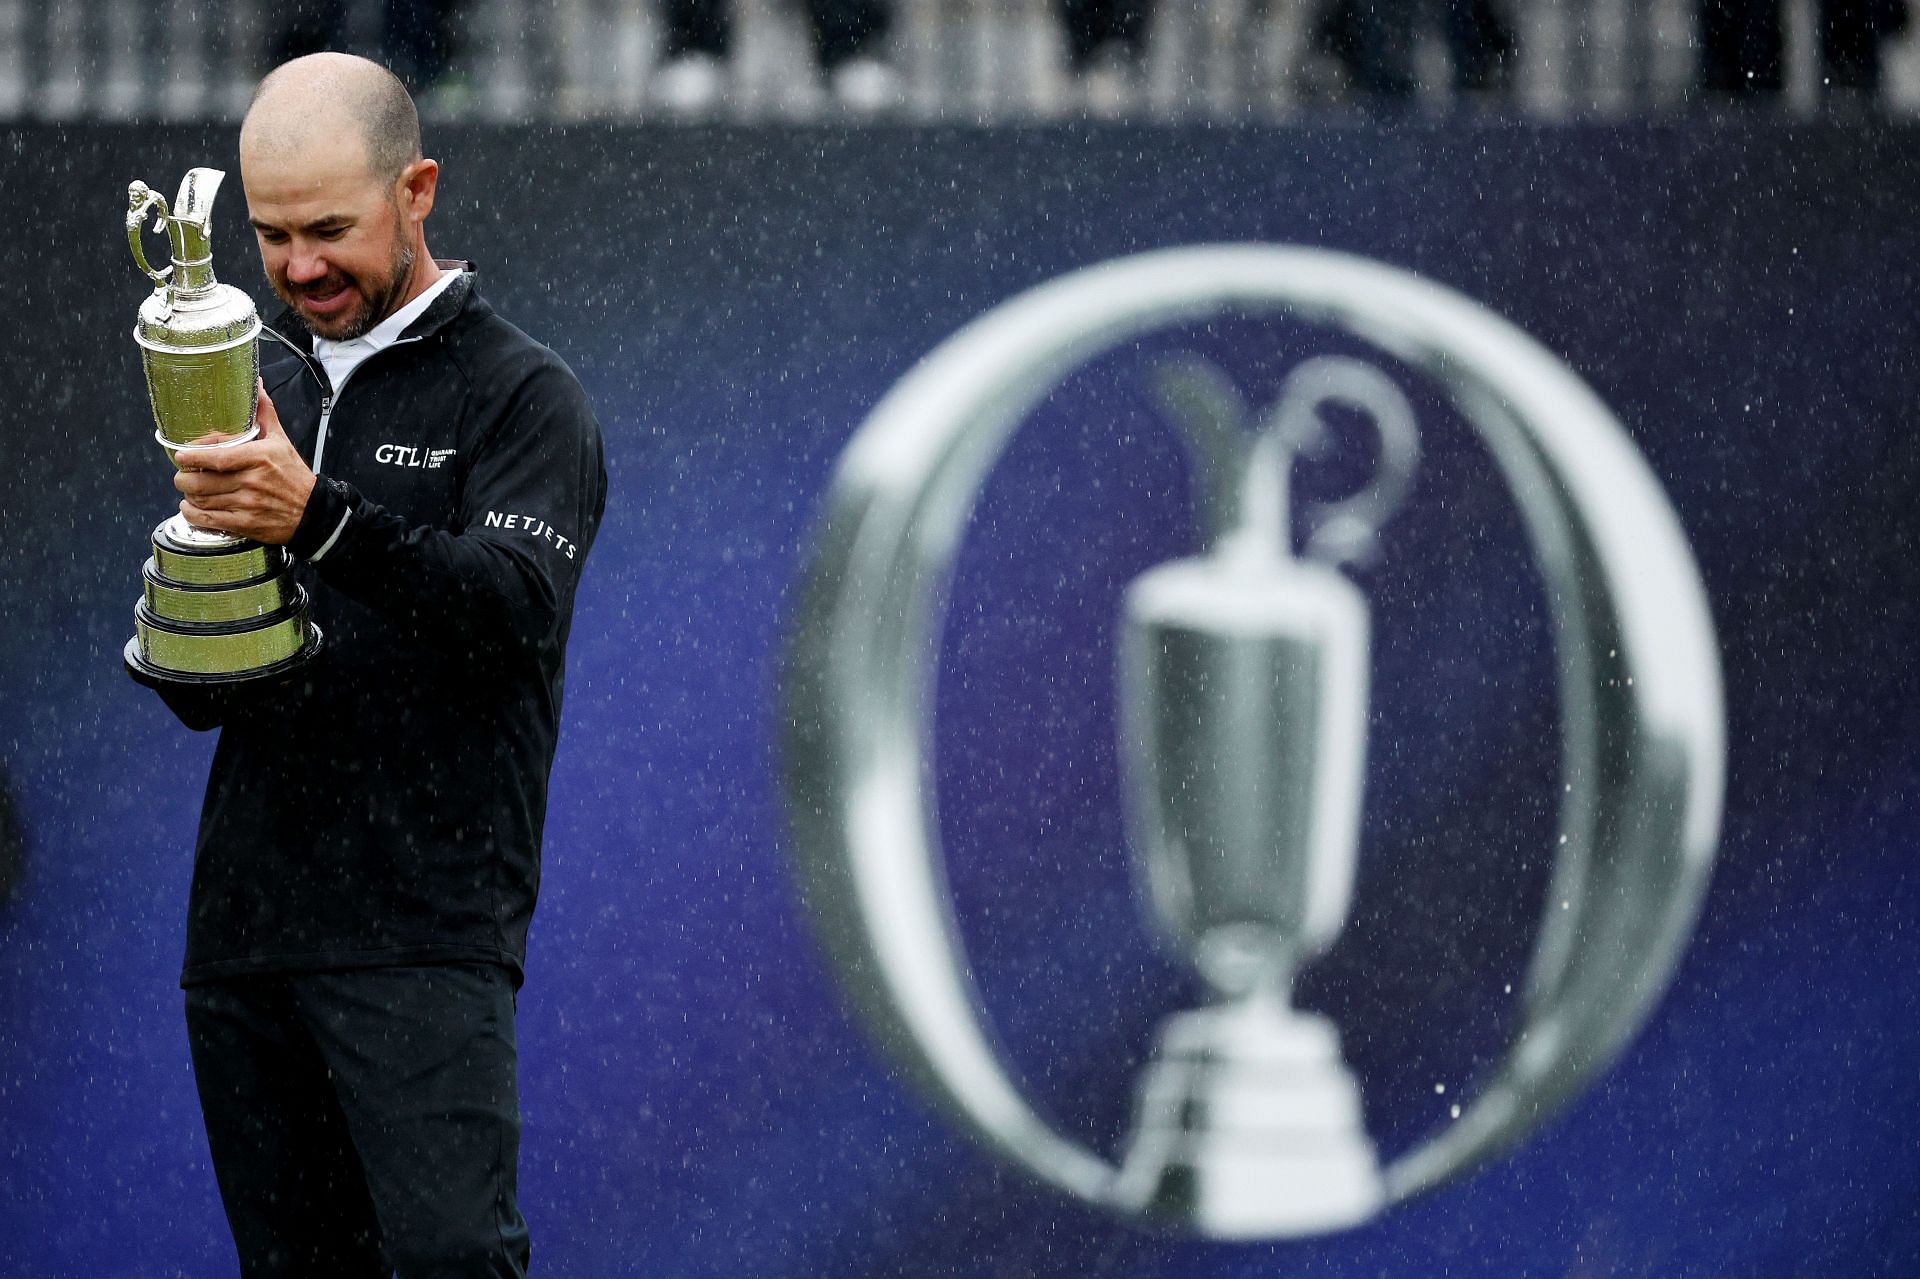 Brian Harman with the Open Champion trophy (via Getty Images)